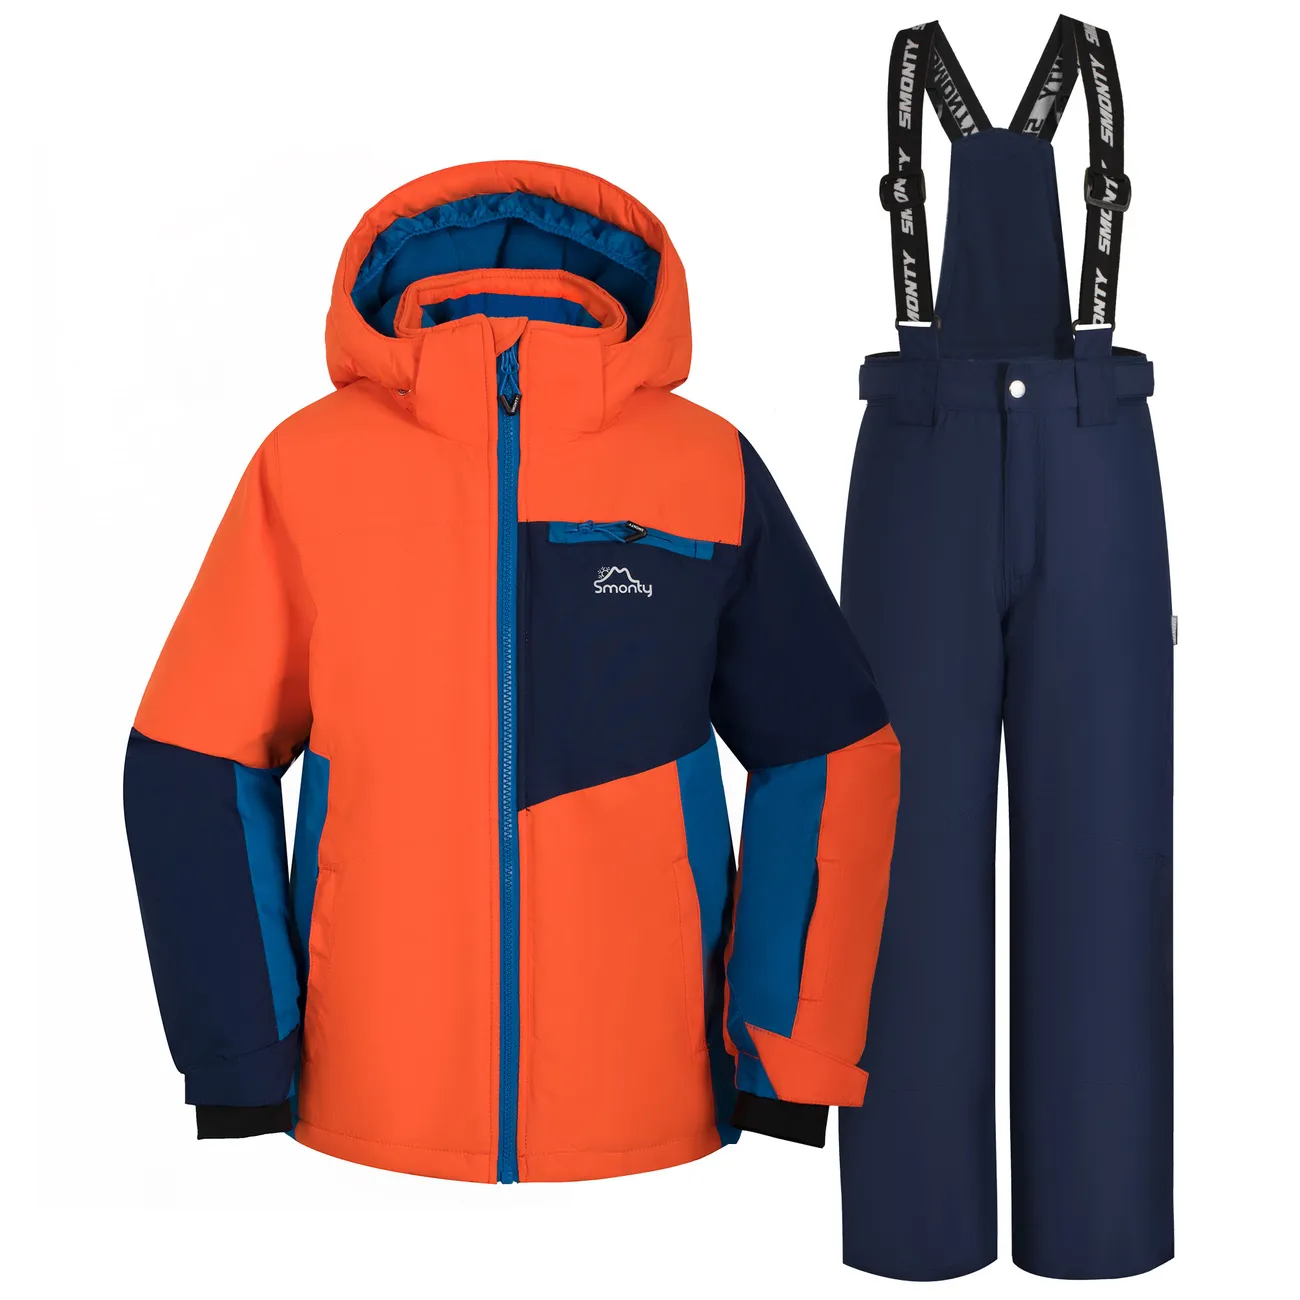 How to Choose a Ski Jacket & Trousers For a Child?